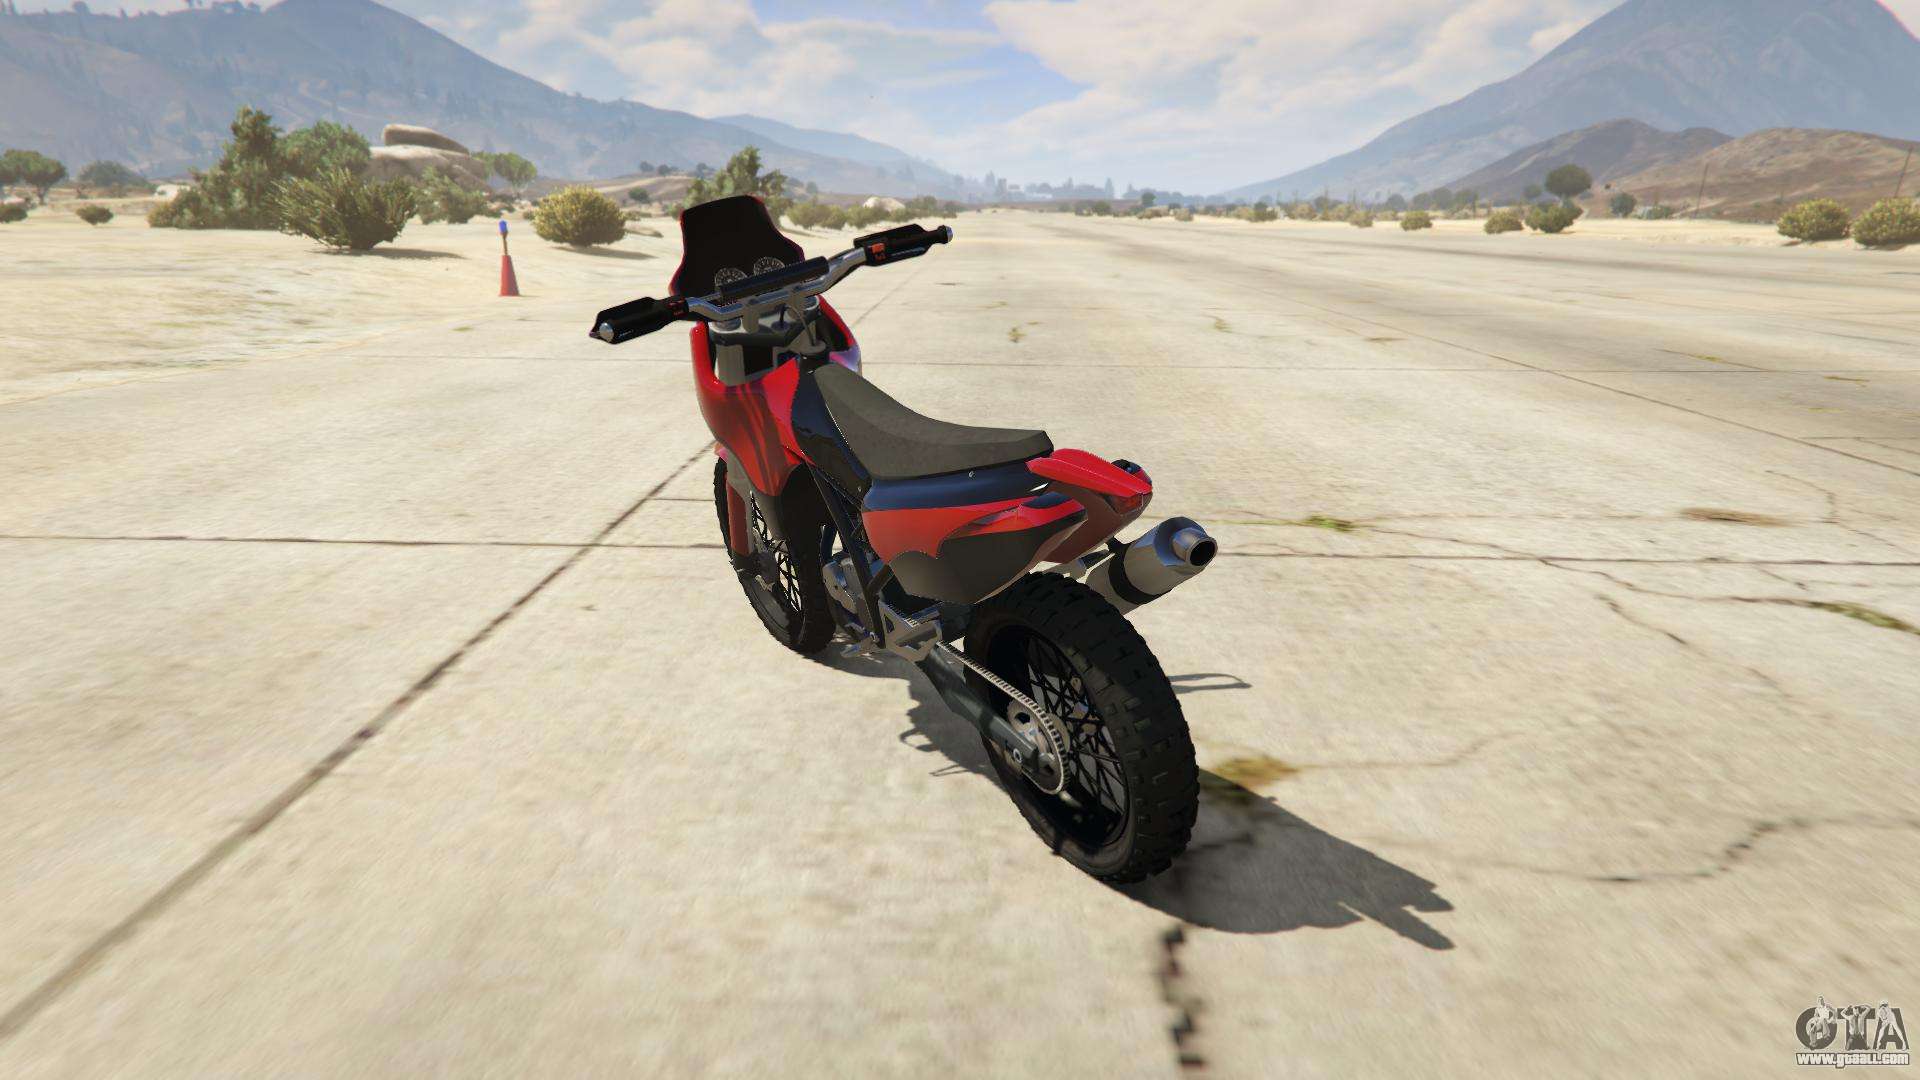 Nagasaki BF400 of GTA 5 - screenshots, features and a description of the  motorcycle